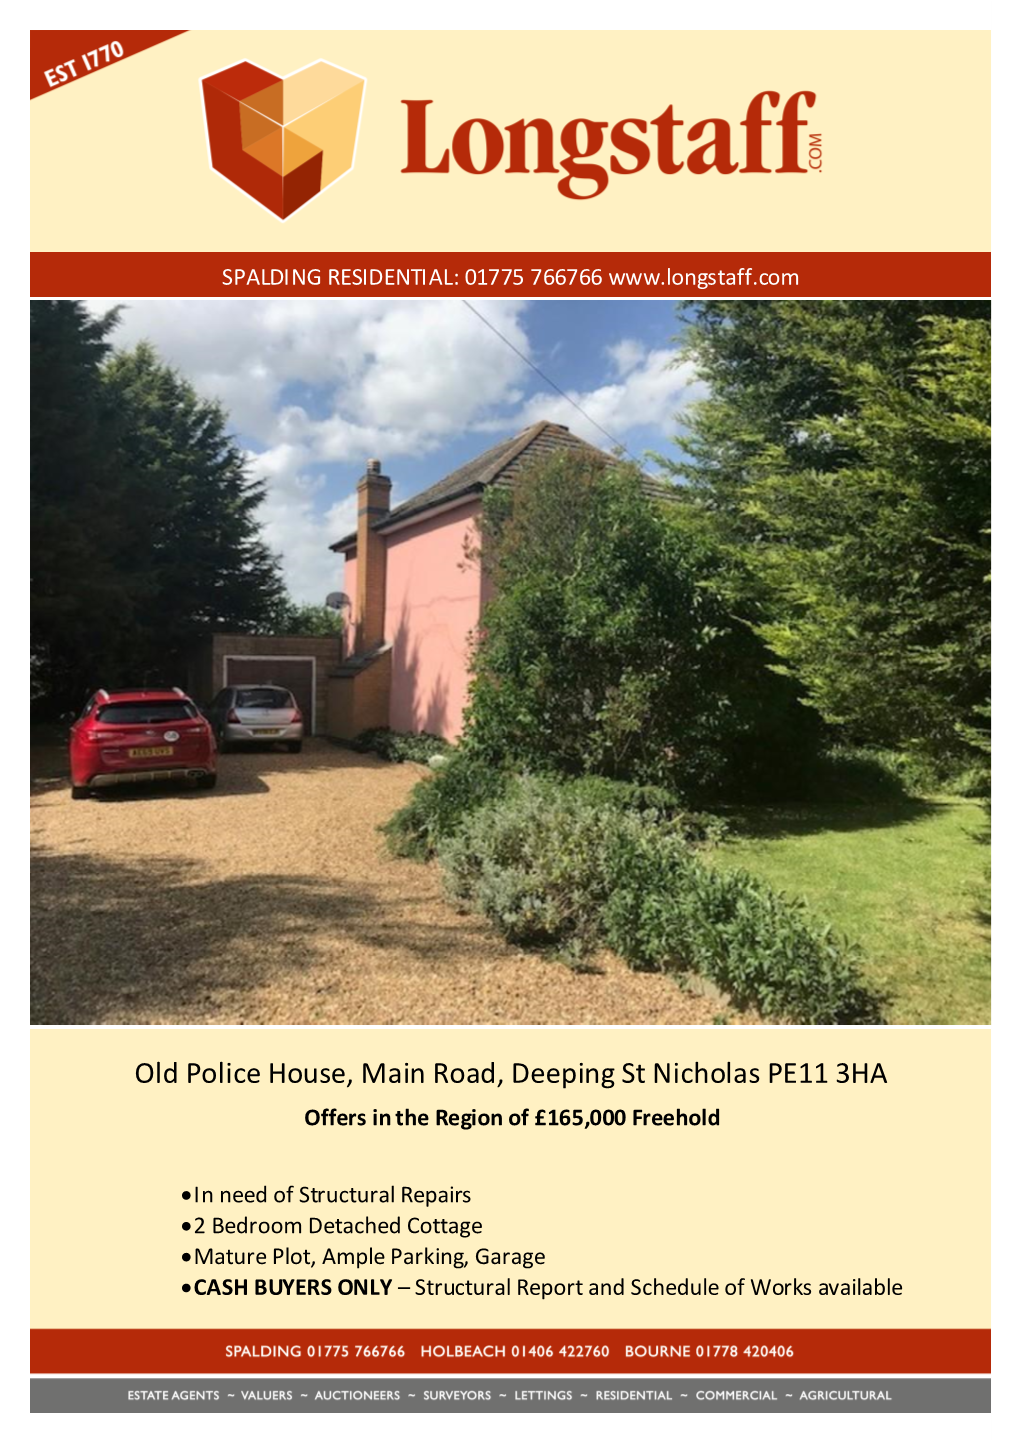 Old Police House, Main Road, Deeping St Nicholas PE11 3HA Offers in the Region of £165,000 Freehold